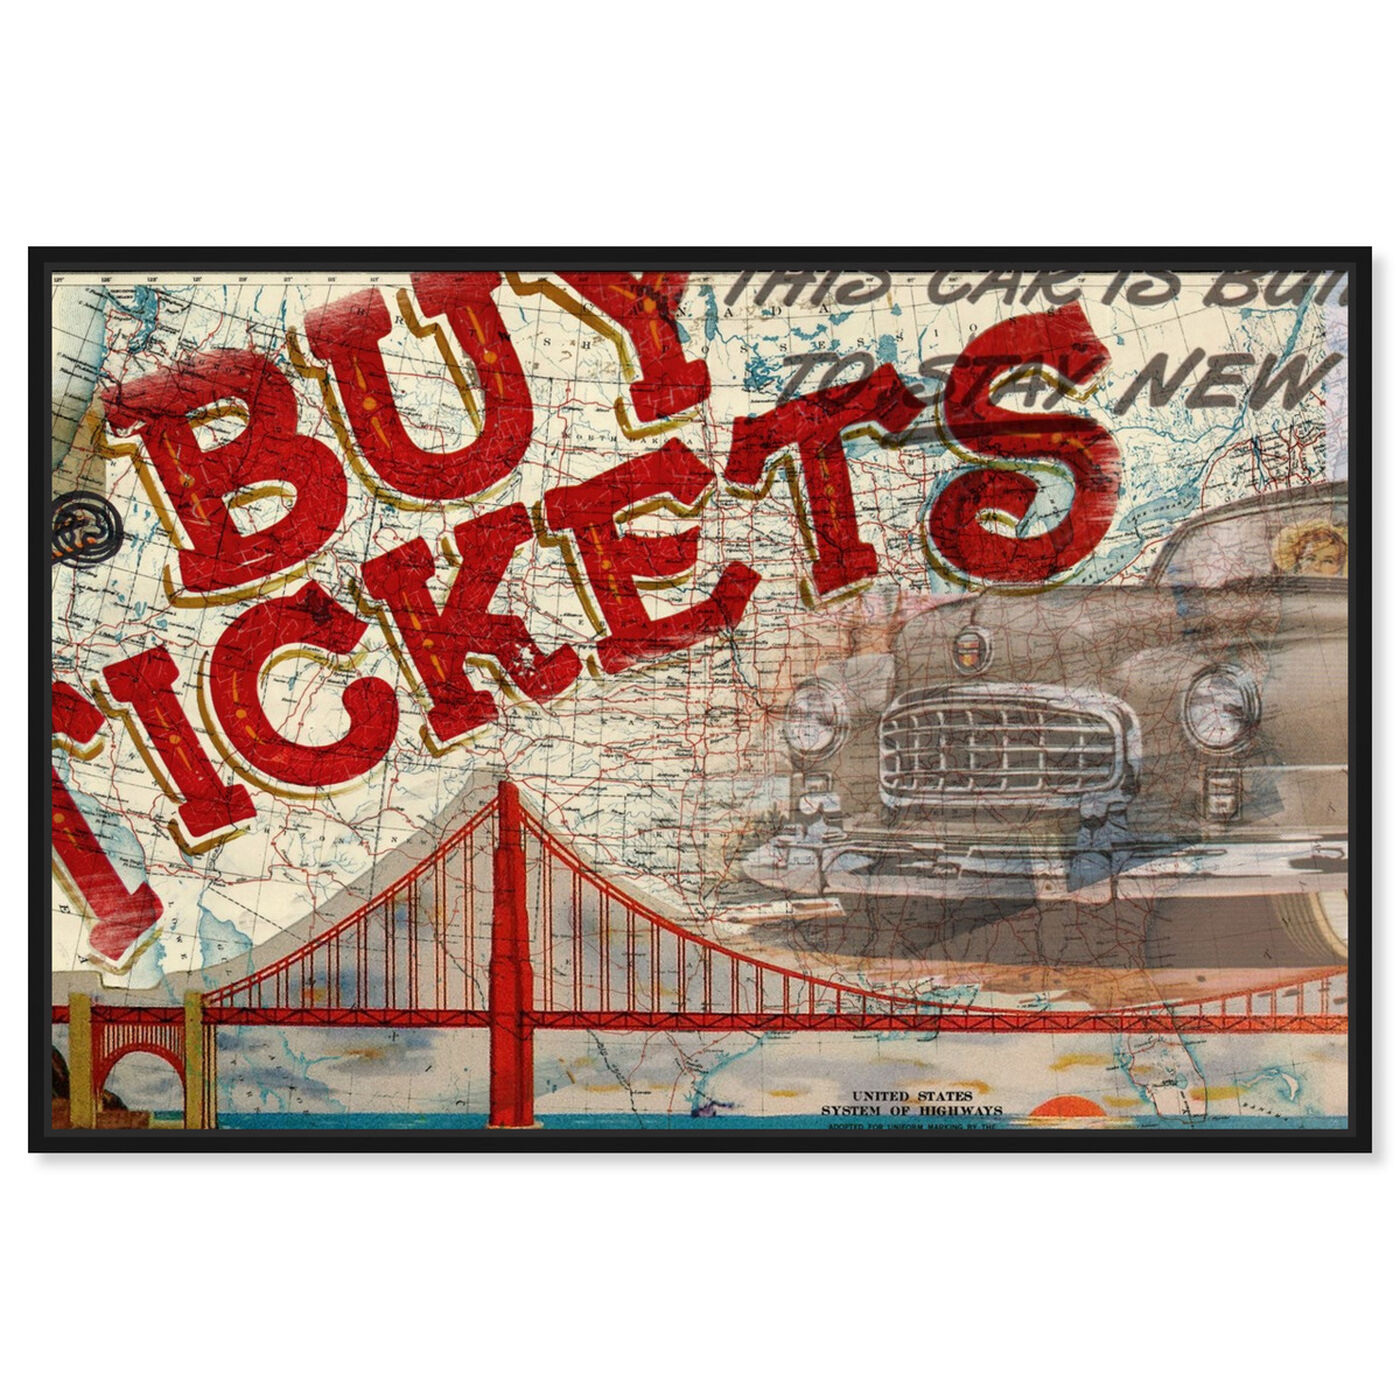 Front view of Buy Tickets featuring advertising and posters art.